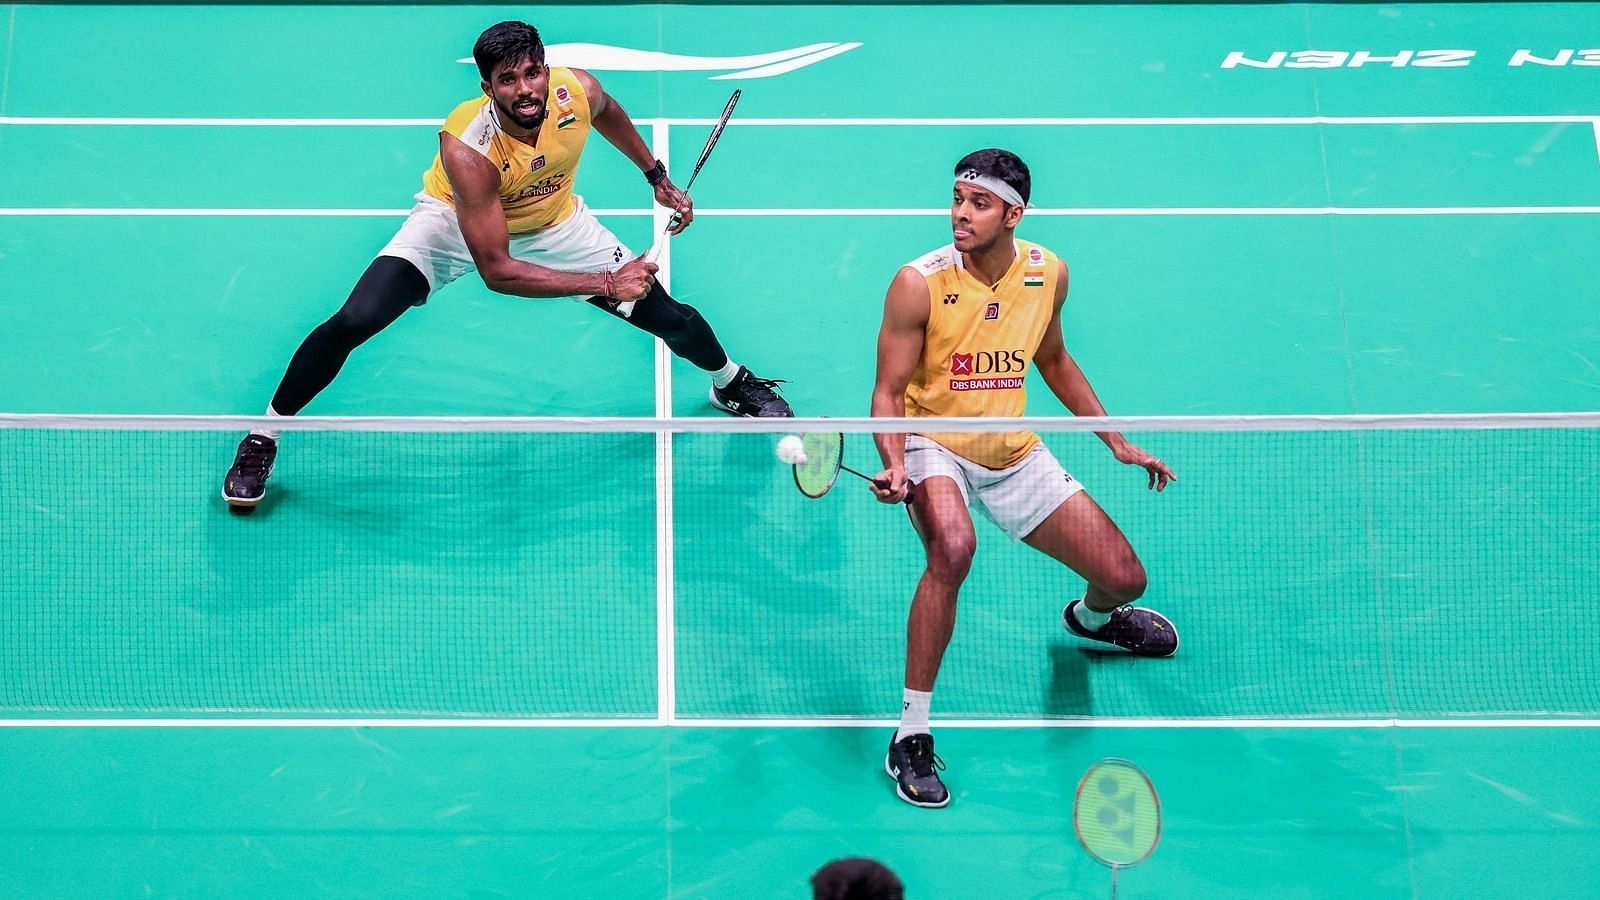 The India Open Super 750 began today 